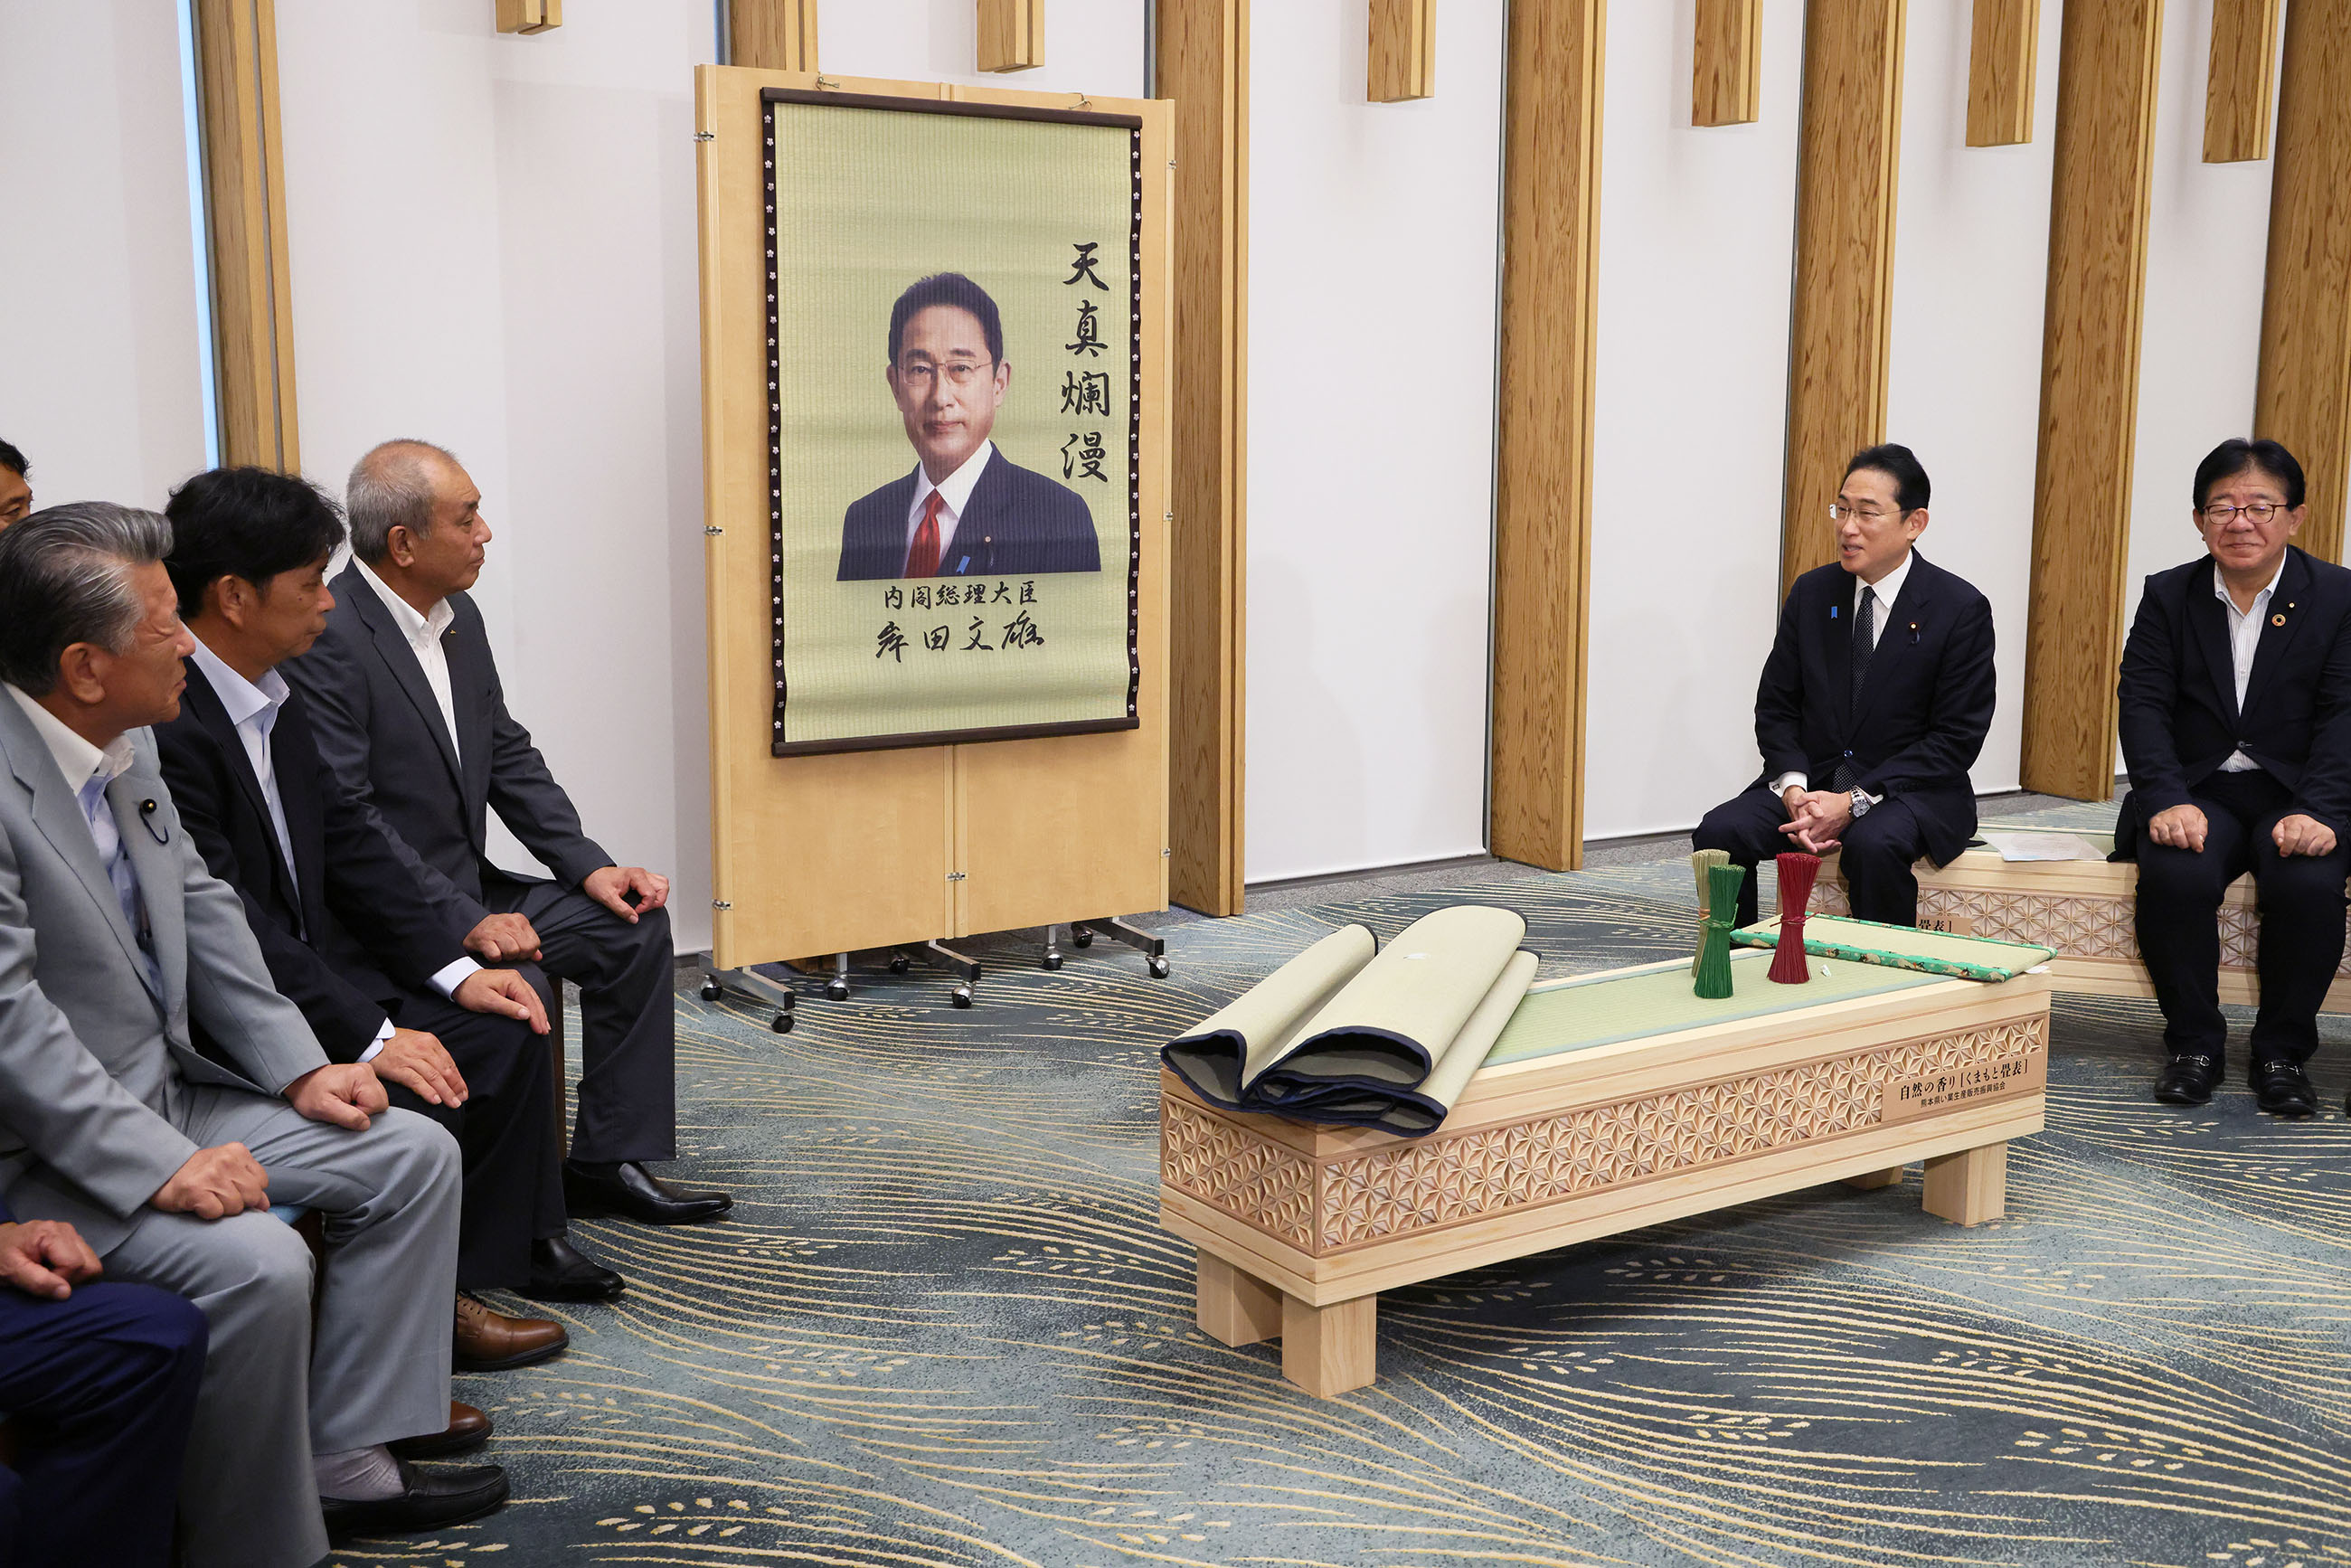 Prime Minister Kishida being presented with igusa products (5)